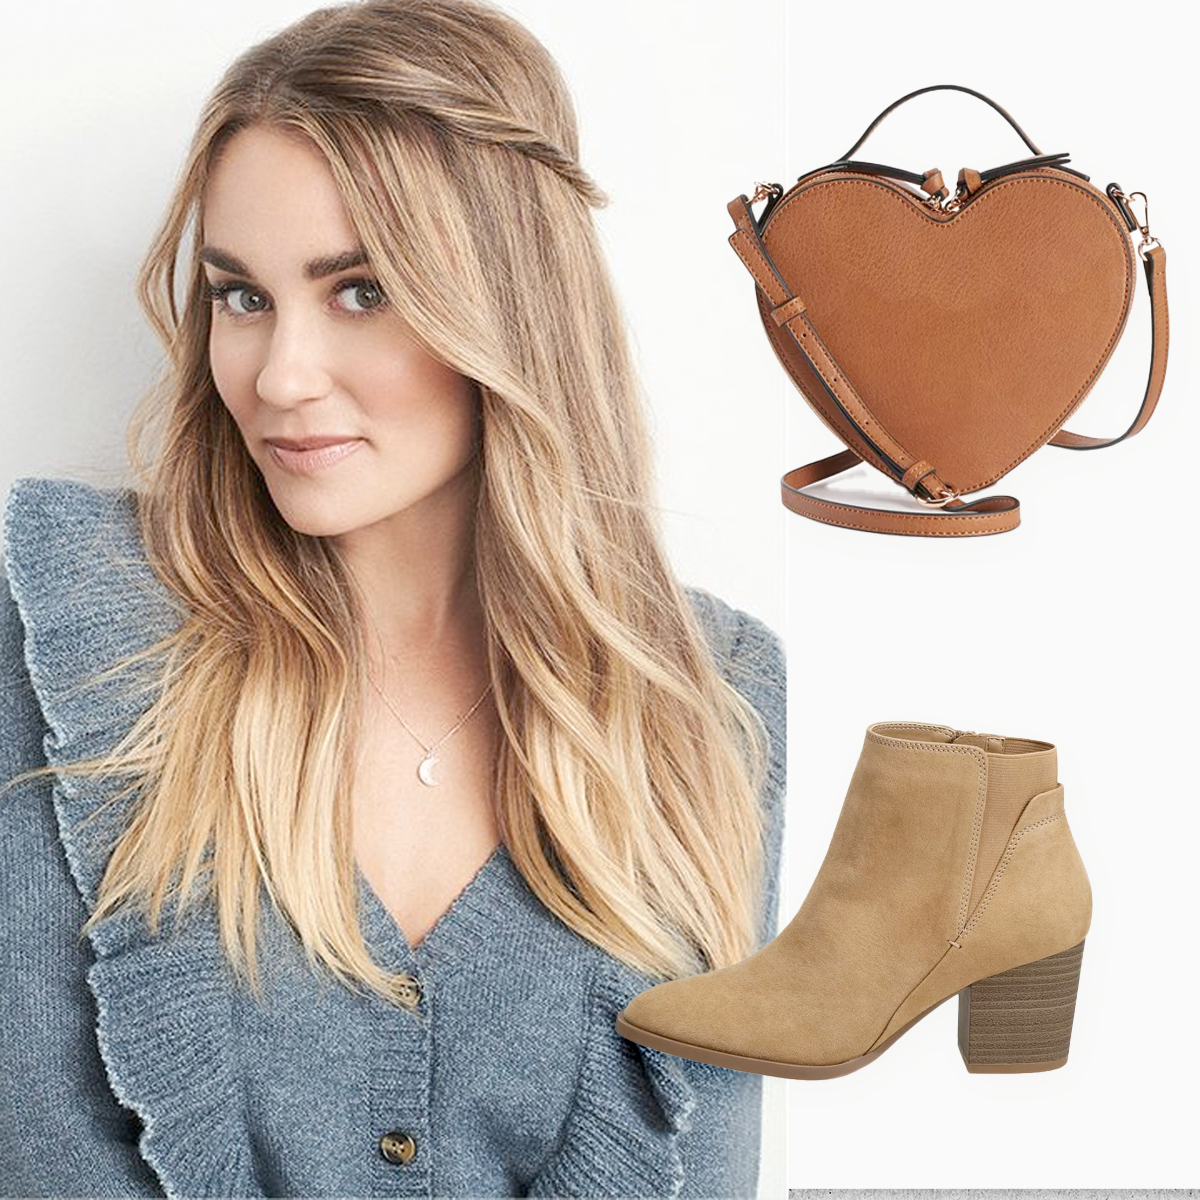 Lauren Conrad for Kohl's Fall 2013 Lookbook - The Budget Babe